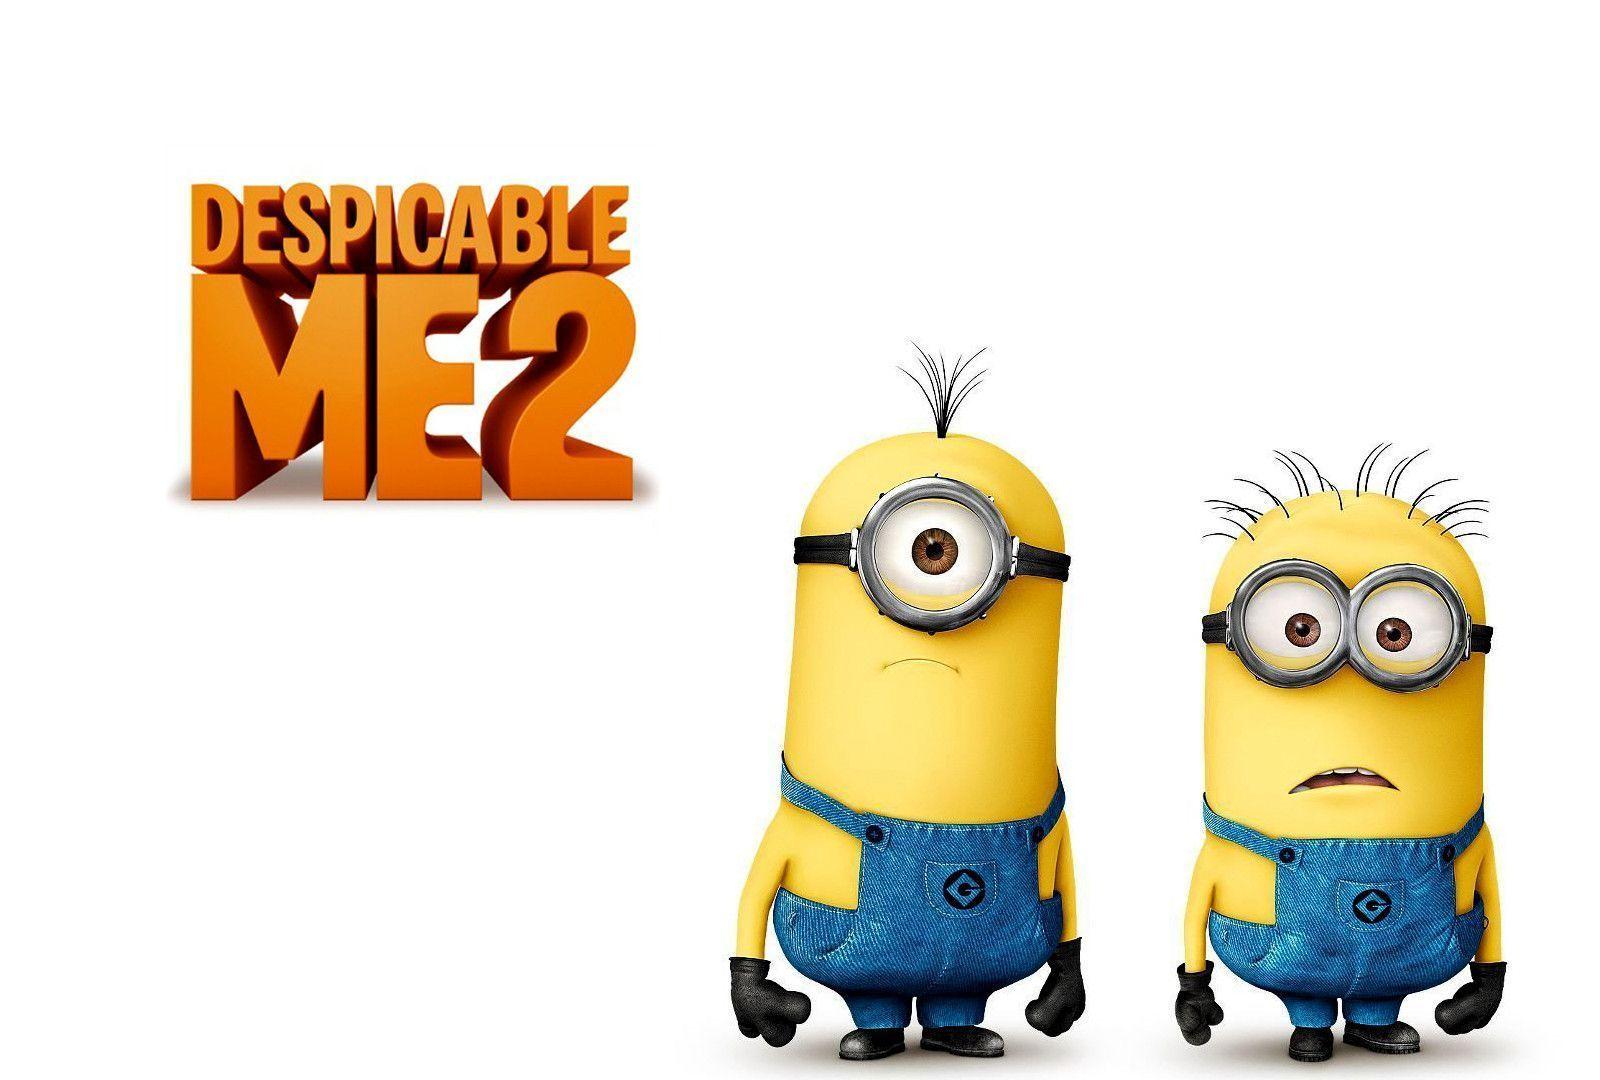 Despicable Me Background Image